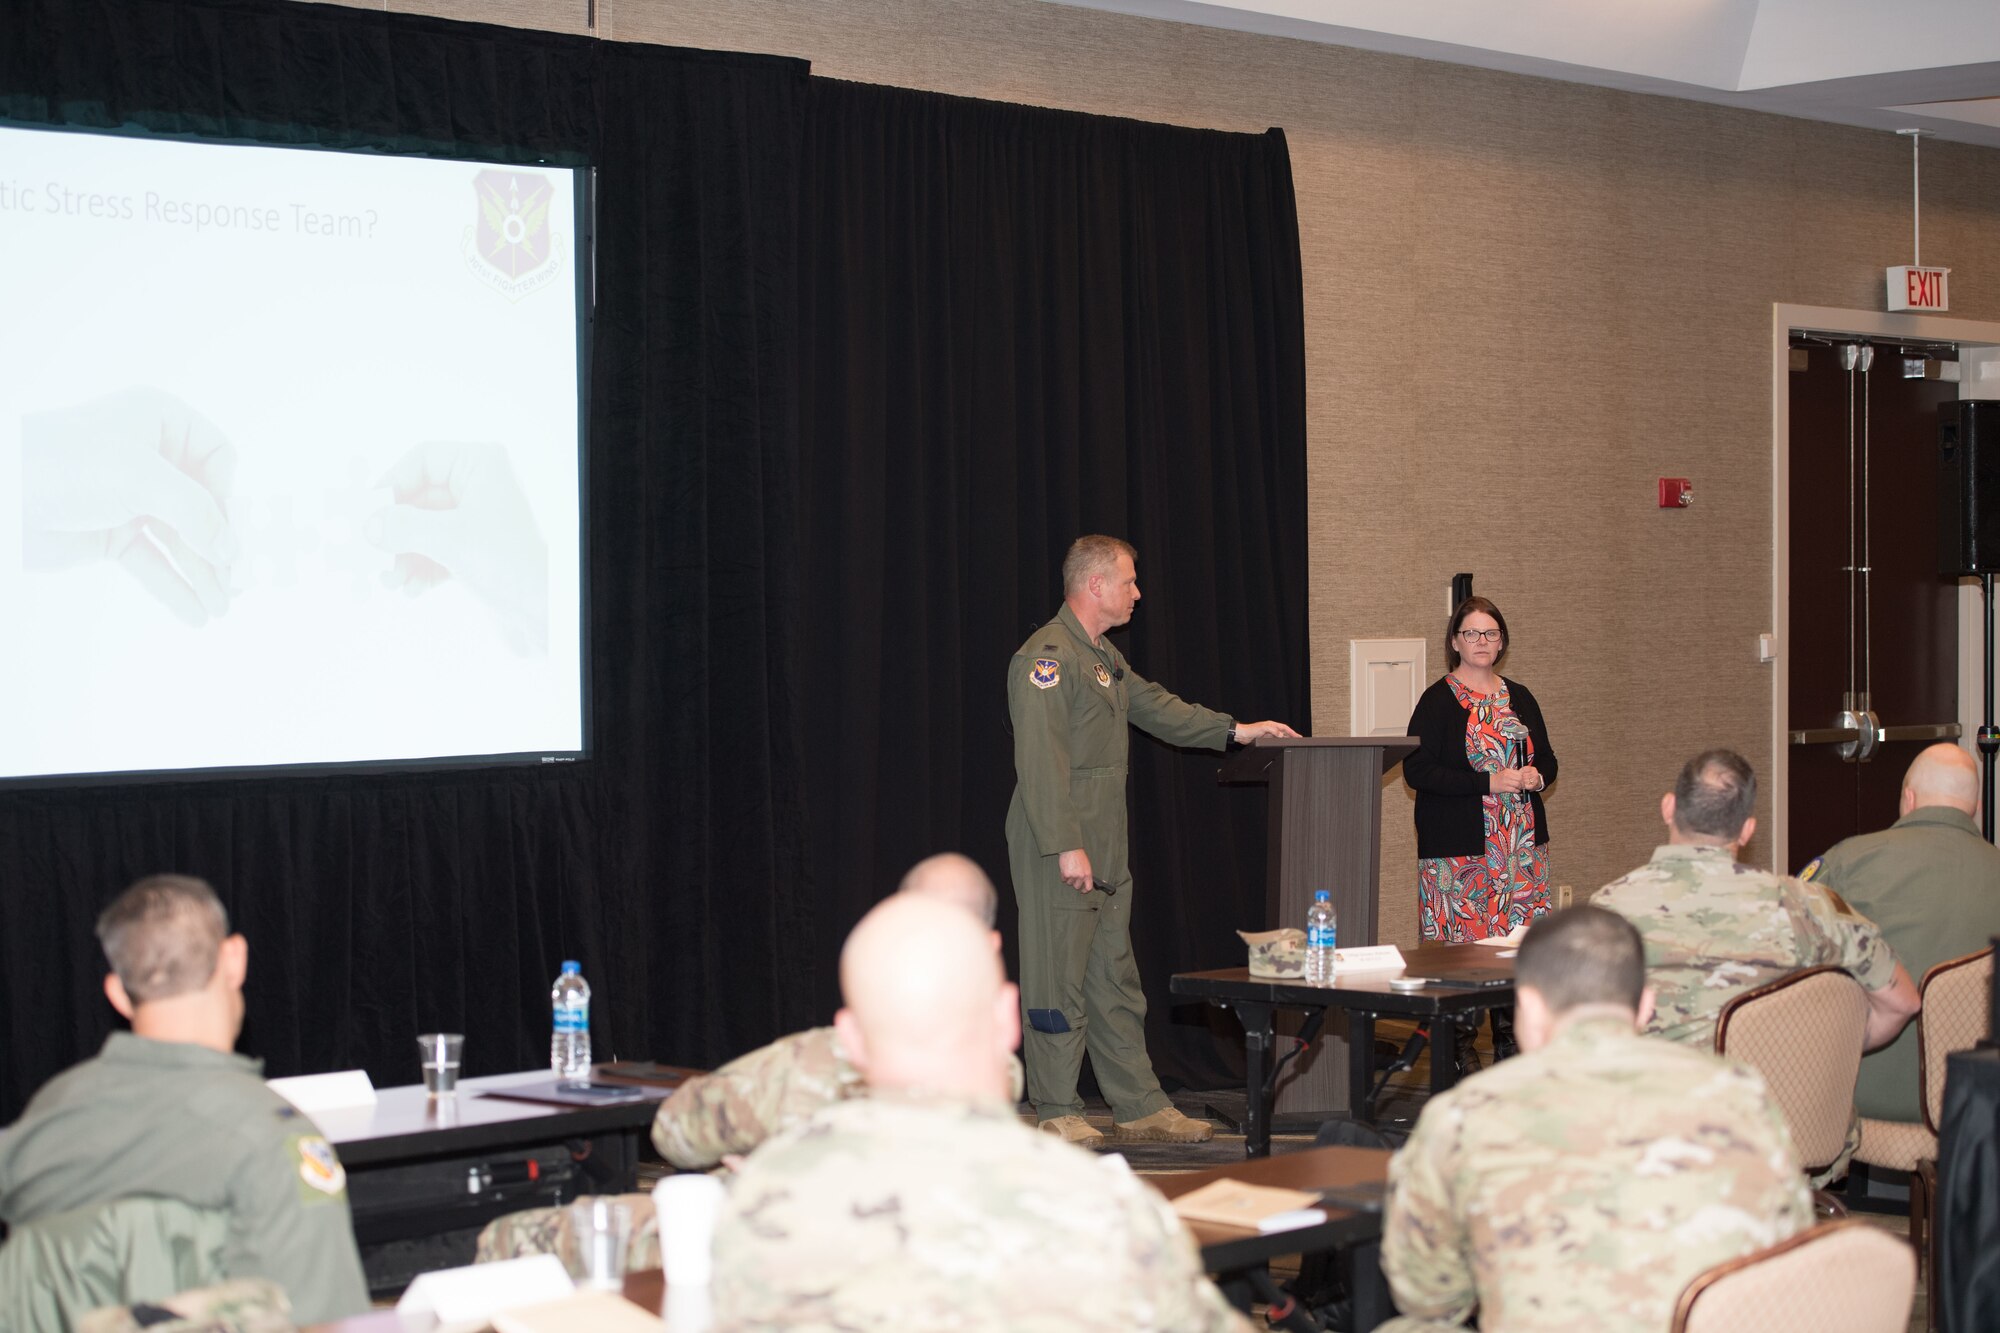 Colonel Allen Duckworth, 301st Fighter Wing Commander, and Ms. Mary Arnold, 301st Fighter Wing Director of Psychological Health, discuss the Traumatic Stress Response Team during the 10th Air Force Commanders and Command Chiefs Conference in Downtown Fort Worth.